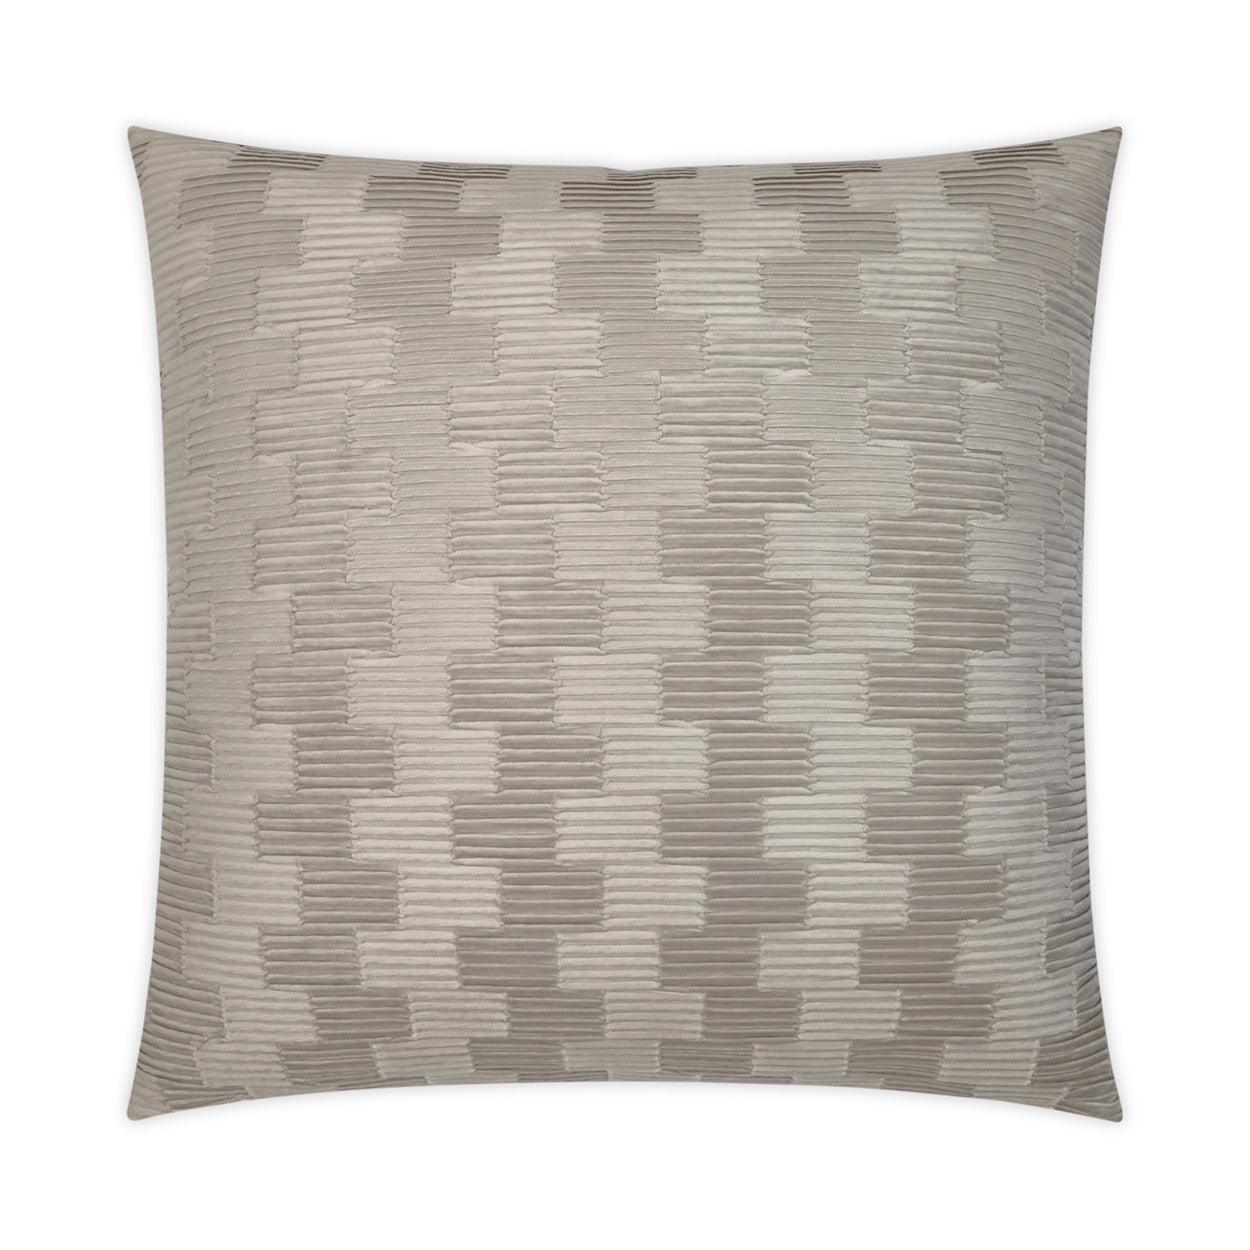 Treble Putty Solid Textured Tan Taupe Large Throw Pillow With Insert - Uptown Sebastian